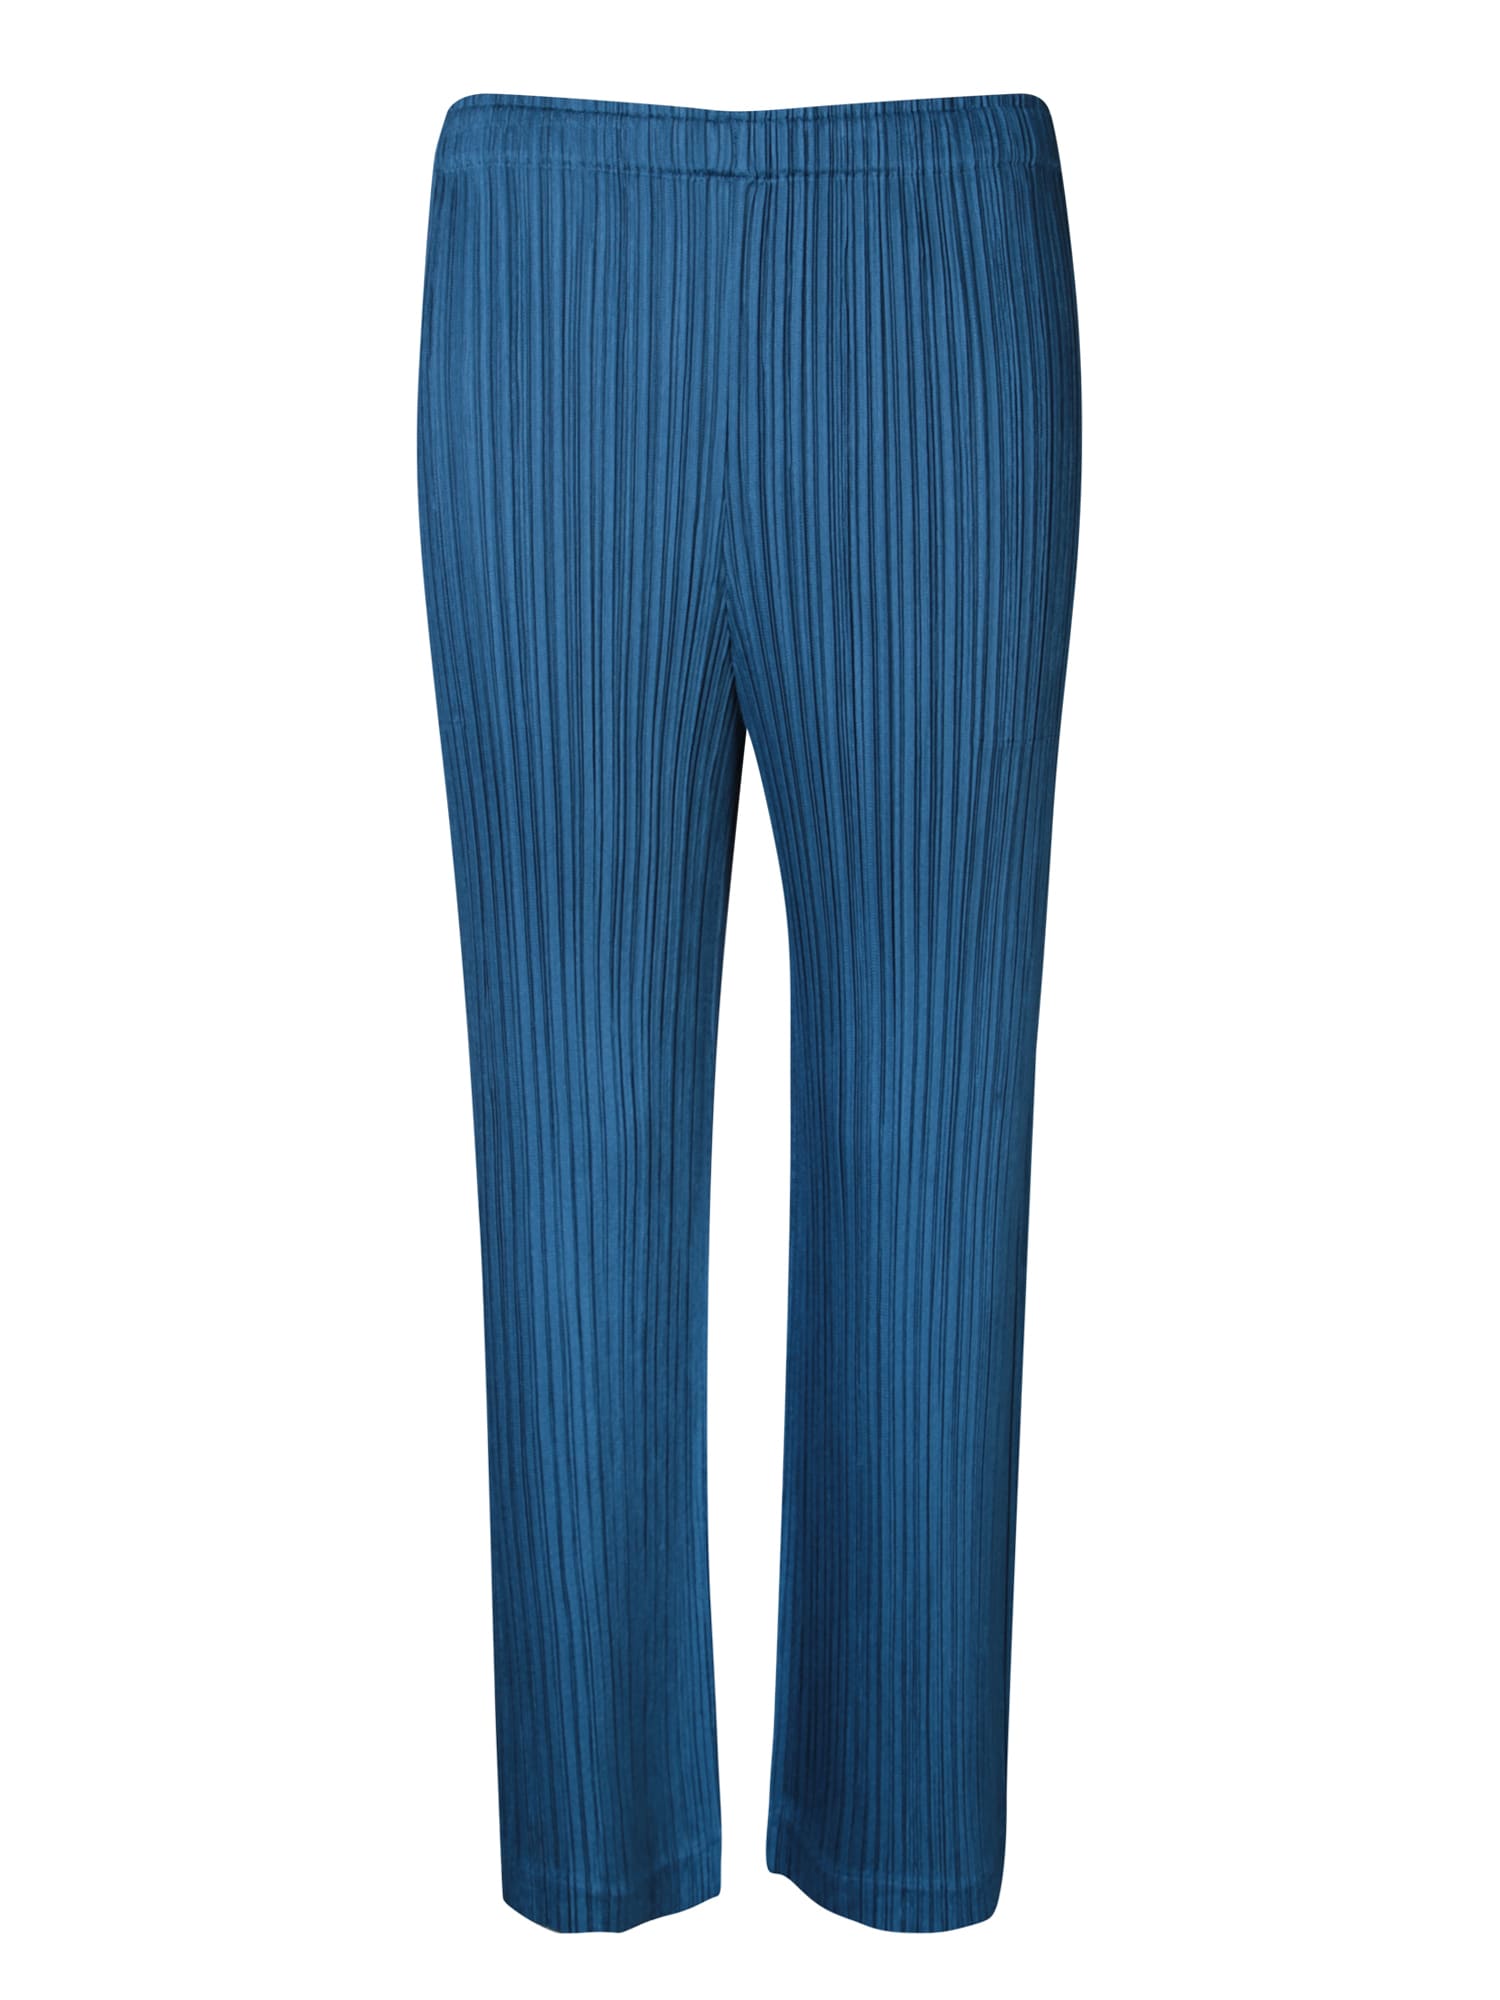 Issey Miyake Pleated Teal Trousers